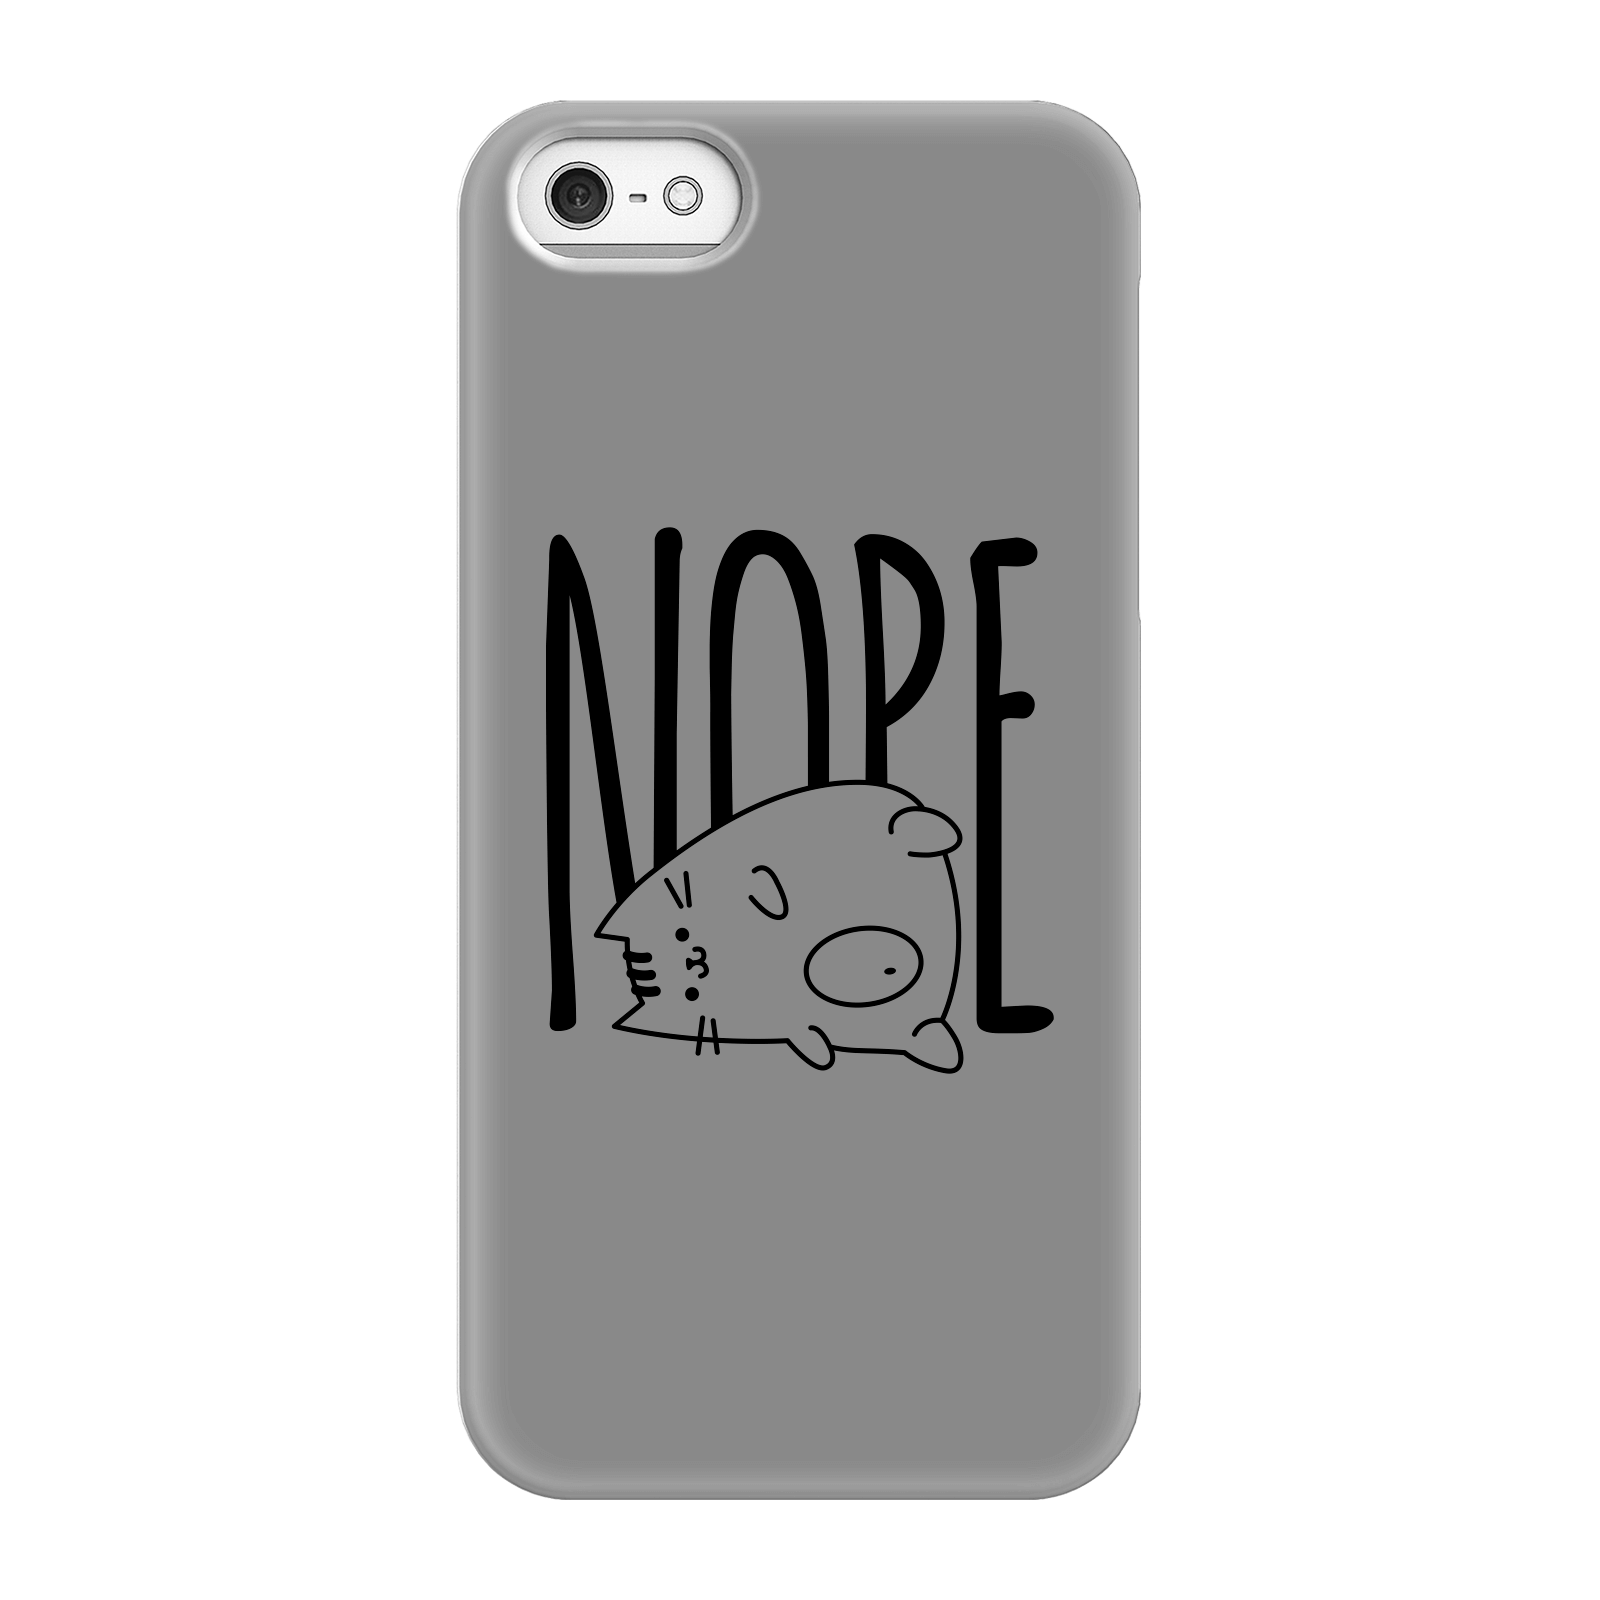 Nope Phone Case for iPhone and Android - iPhone 5/5s - Snap Case - Gloss